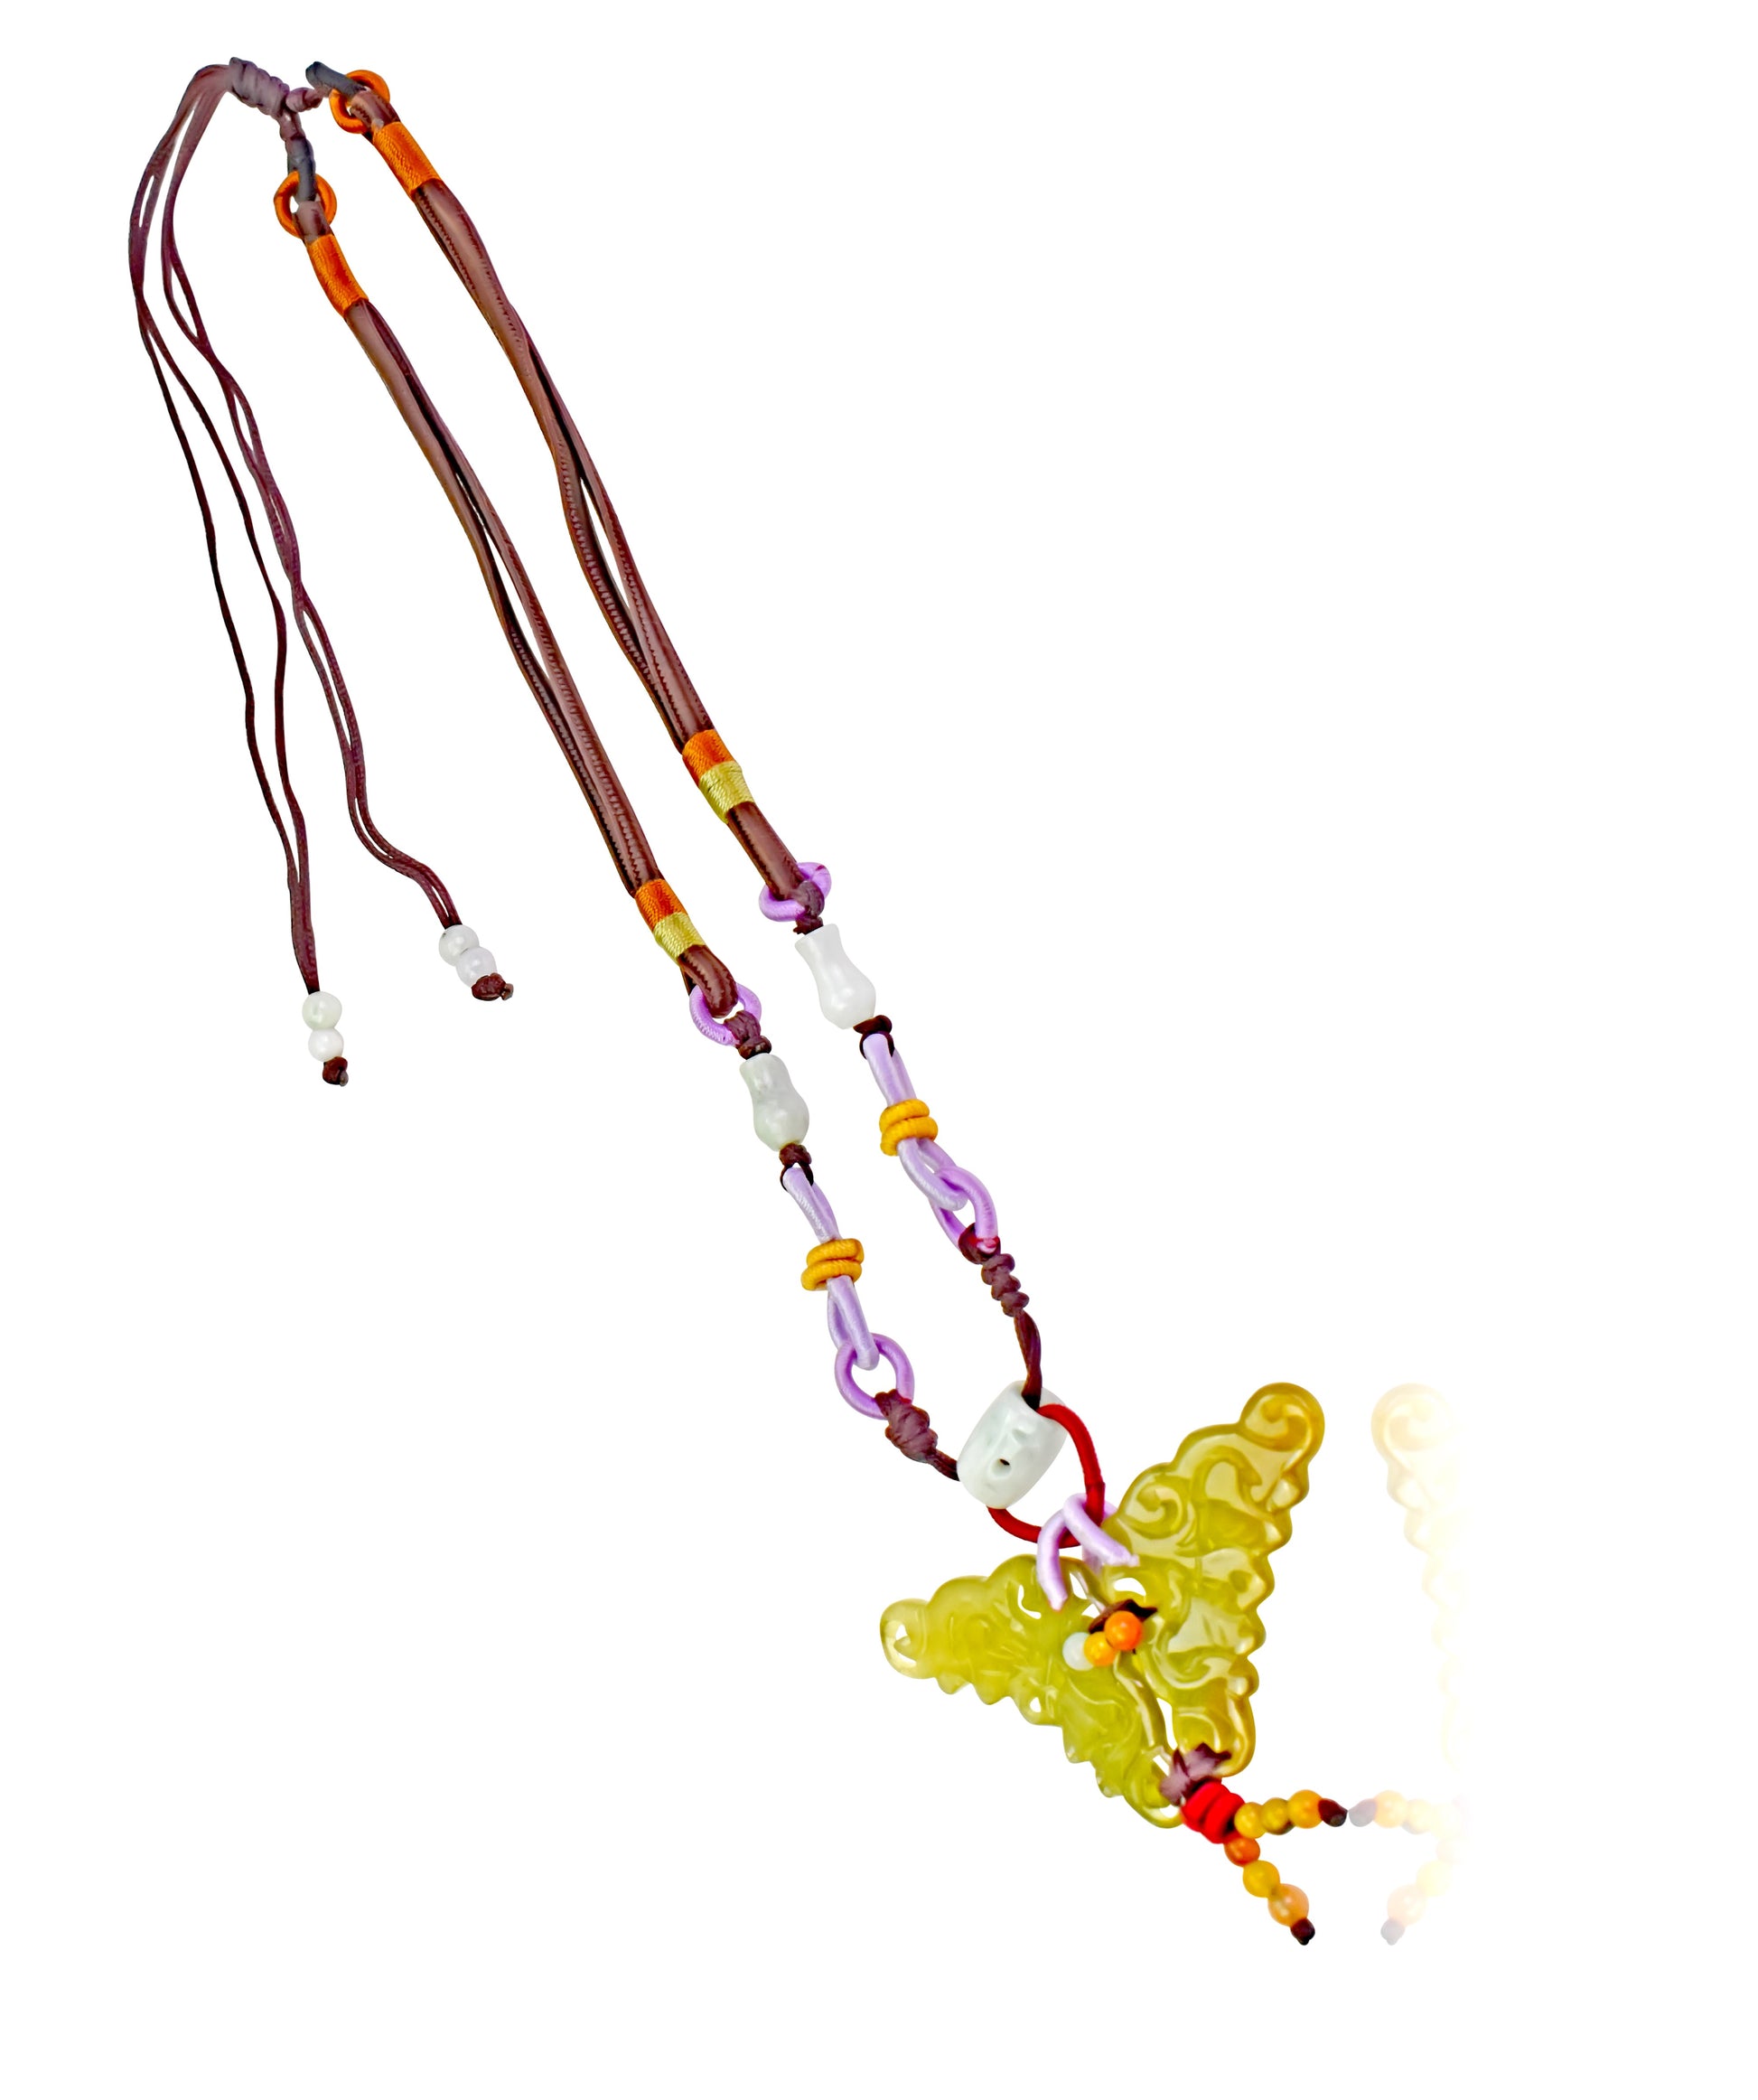 Wear Your Warrior Spirit with a Double Medallion Necklace made with Lavender Cord